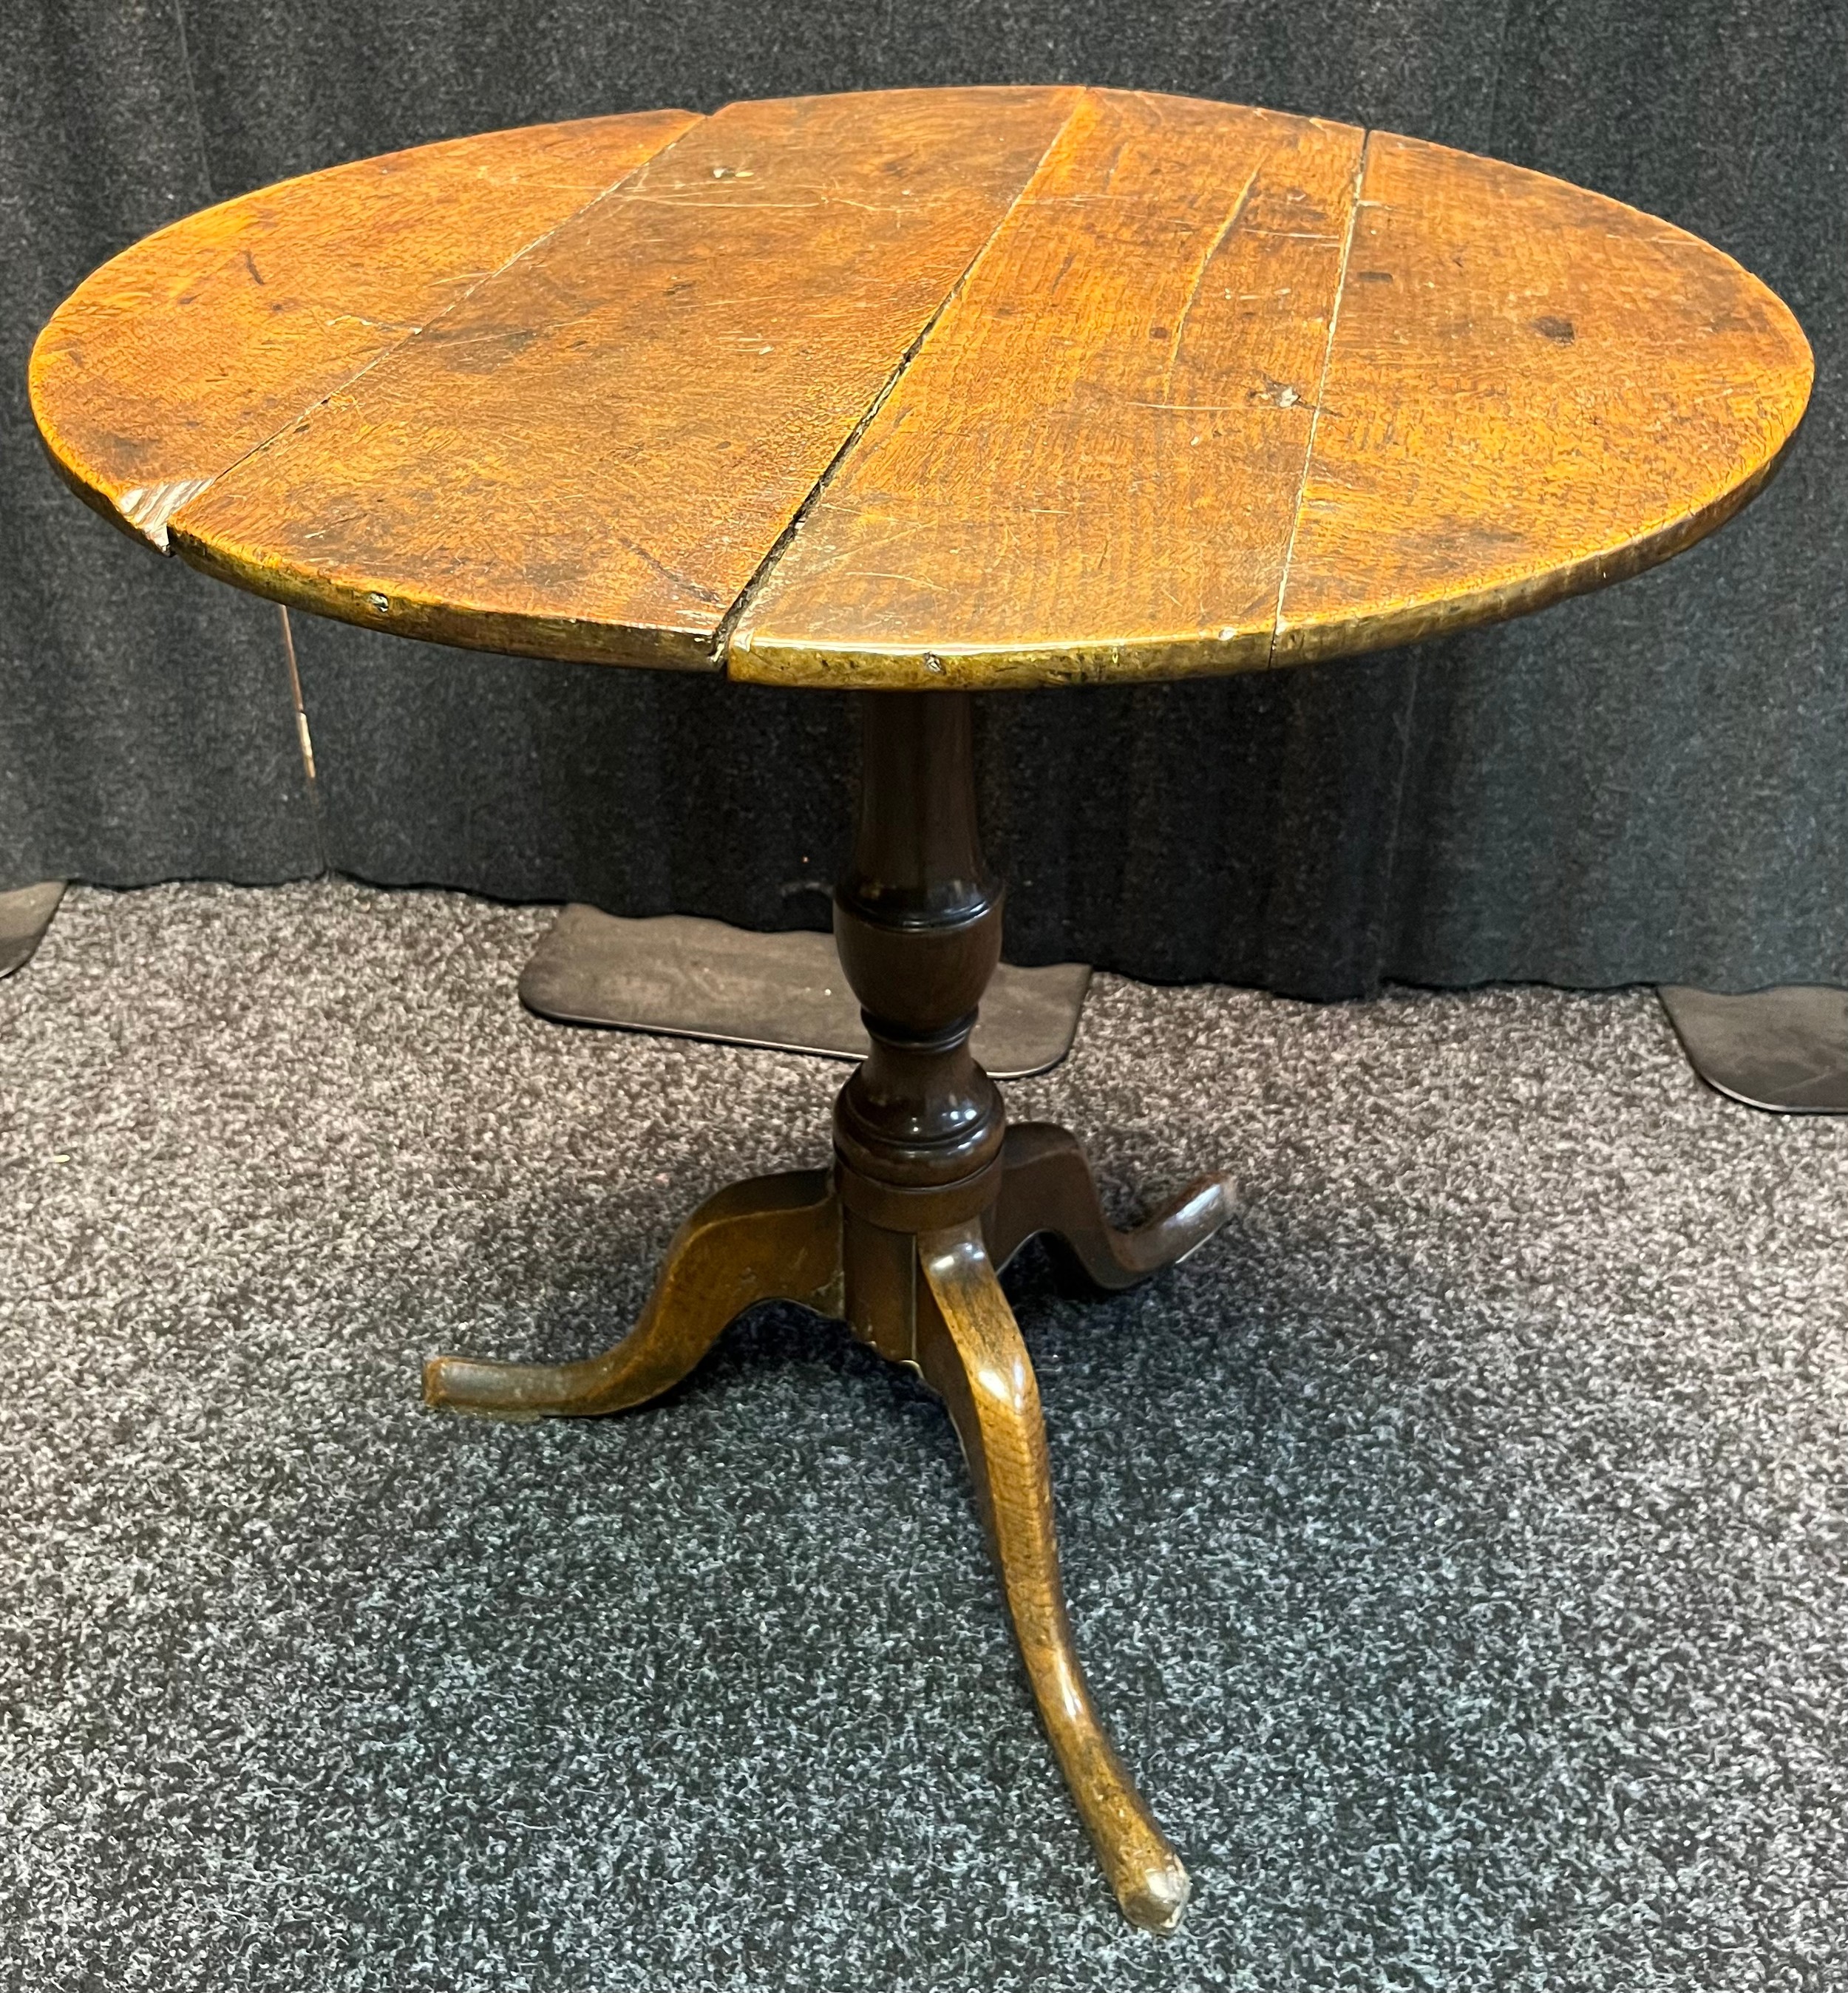 18th/19th century snap top table, the circular top raised on a tripod base [64cm high, 64cm in